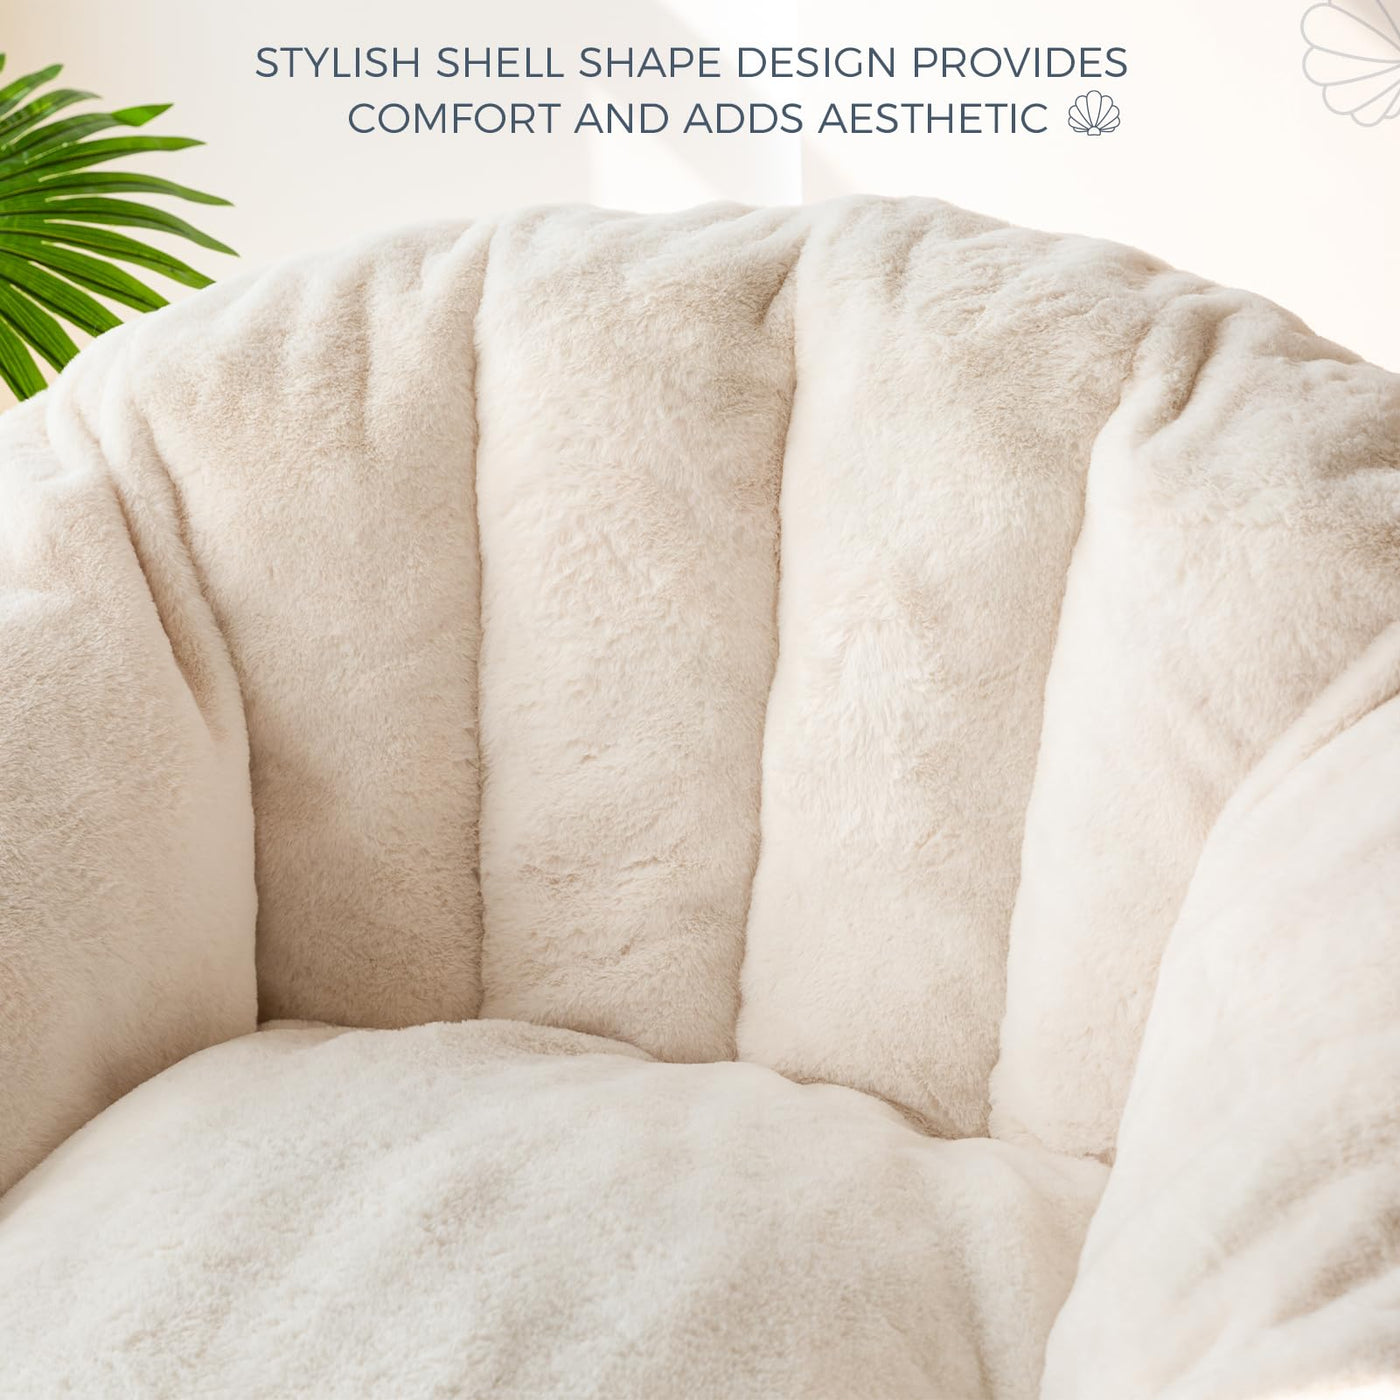 MAXYOYO Giant Bean Bag Chair, Faux Fur Shell-Shaped Oversized Bean Bag Chair with Filler for Gaming, Reading (Beige)